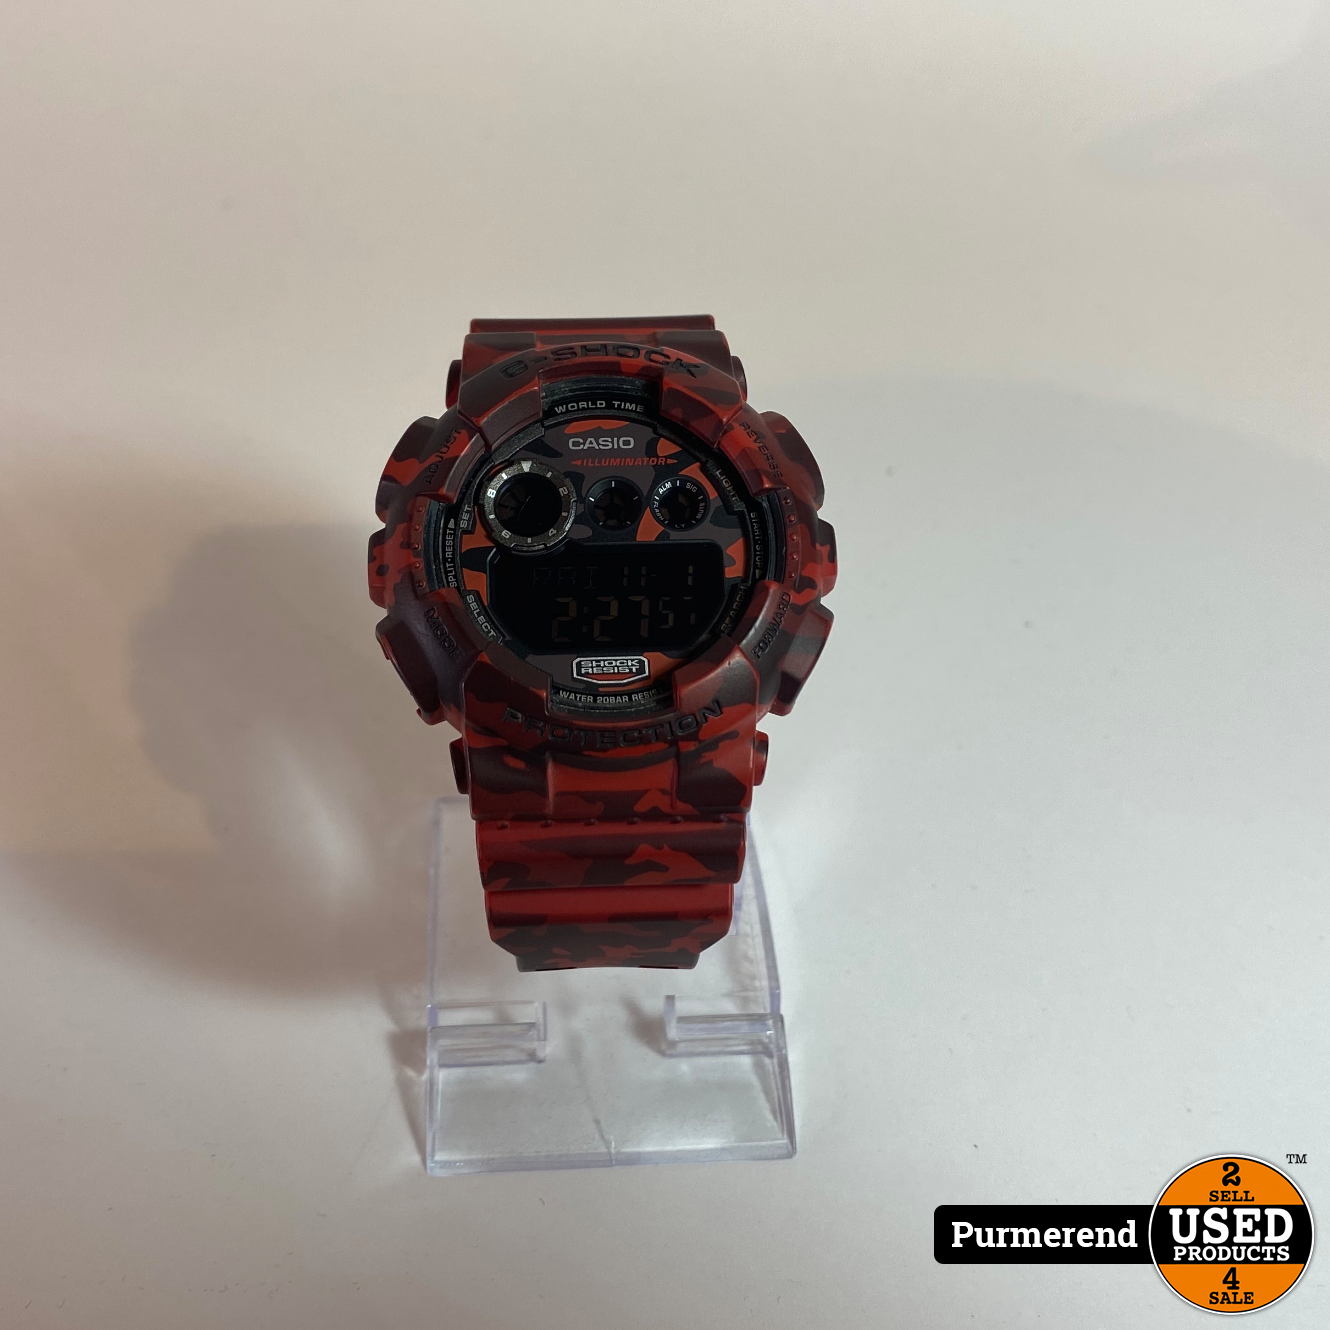 Regeren ontrouw Impressionisme G-Shock GD-120CM Leger Rood | Nette Staat - Used Products Purmerend